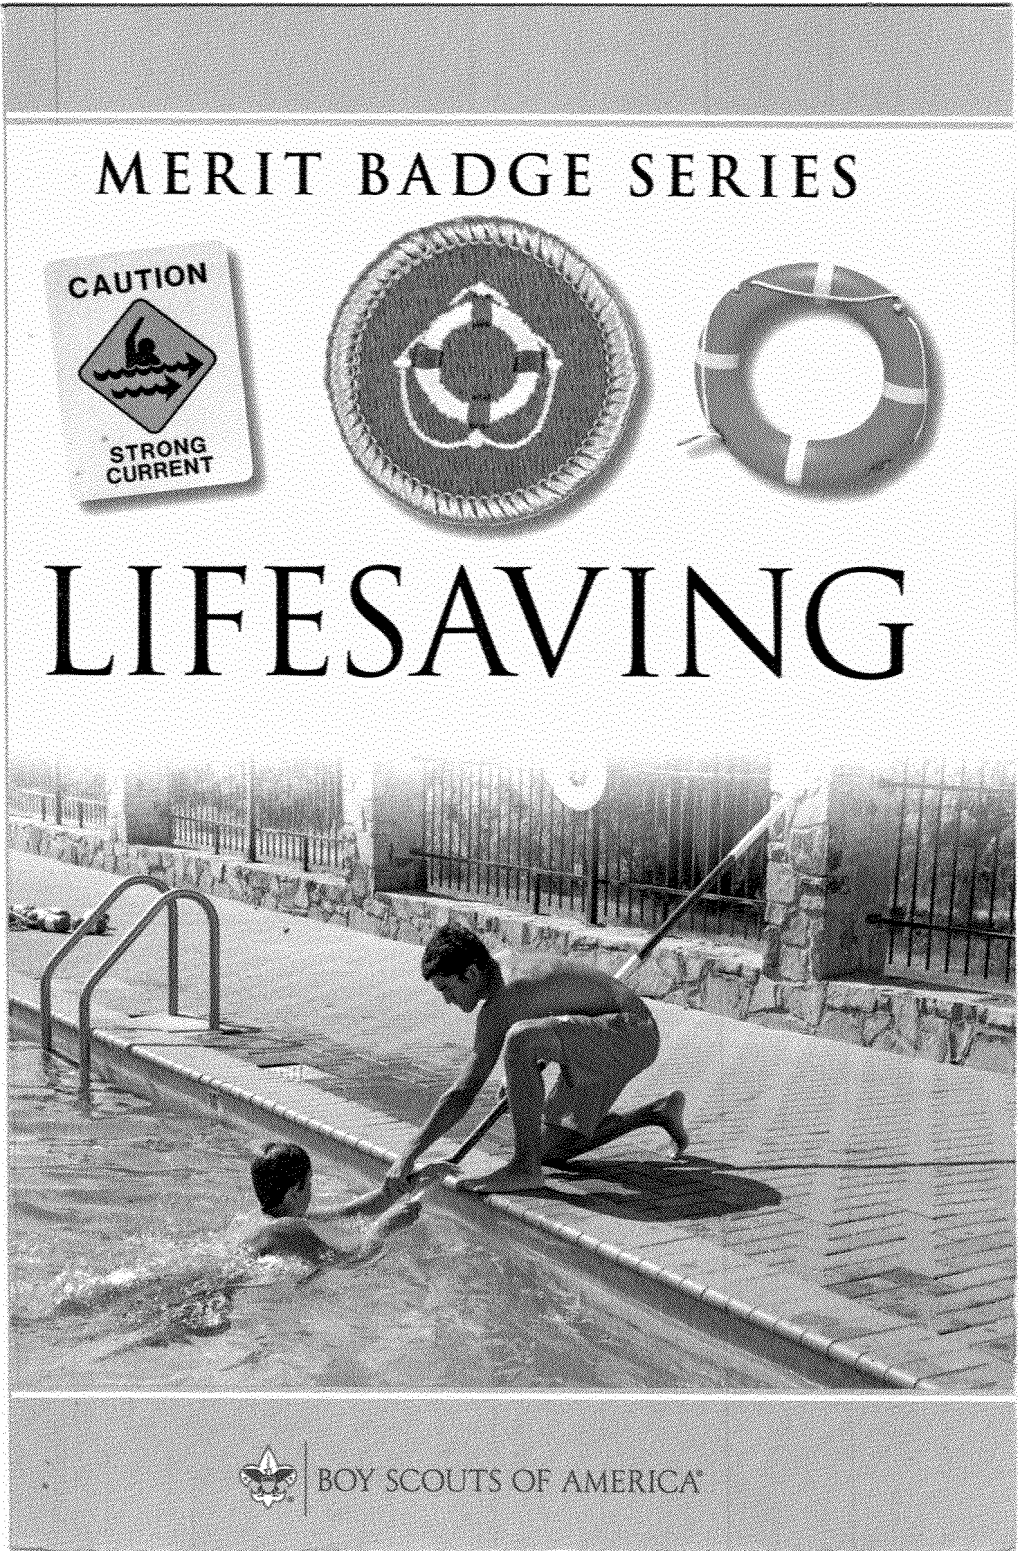 LIFESAVING I How to Usethis Pamphlet � R the Secretto Successfully Earning a Merit Badge Is for You to Use Both the Pamphlet Ana the Suggestions of Your Counselor